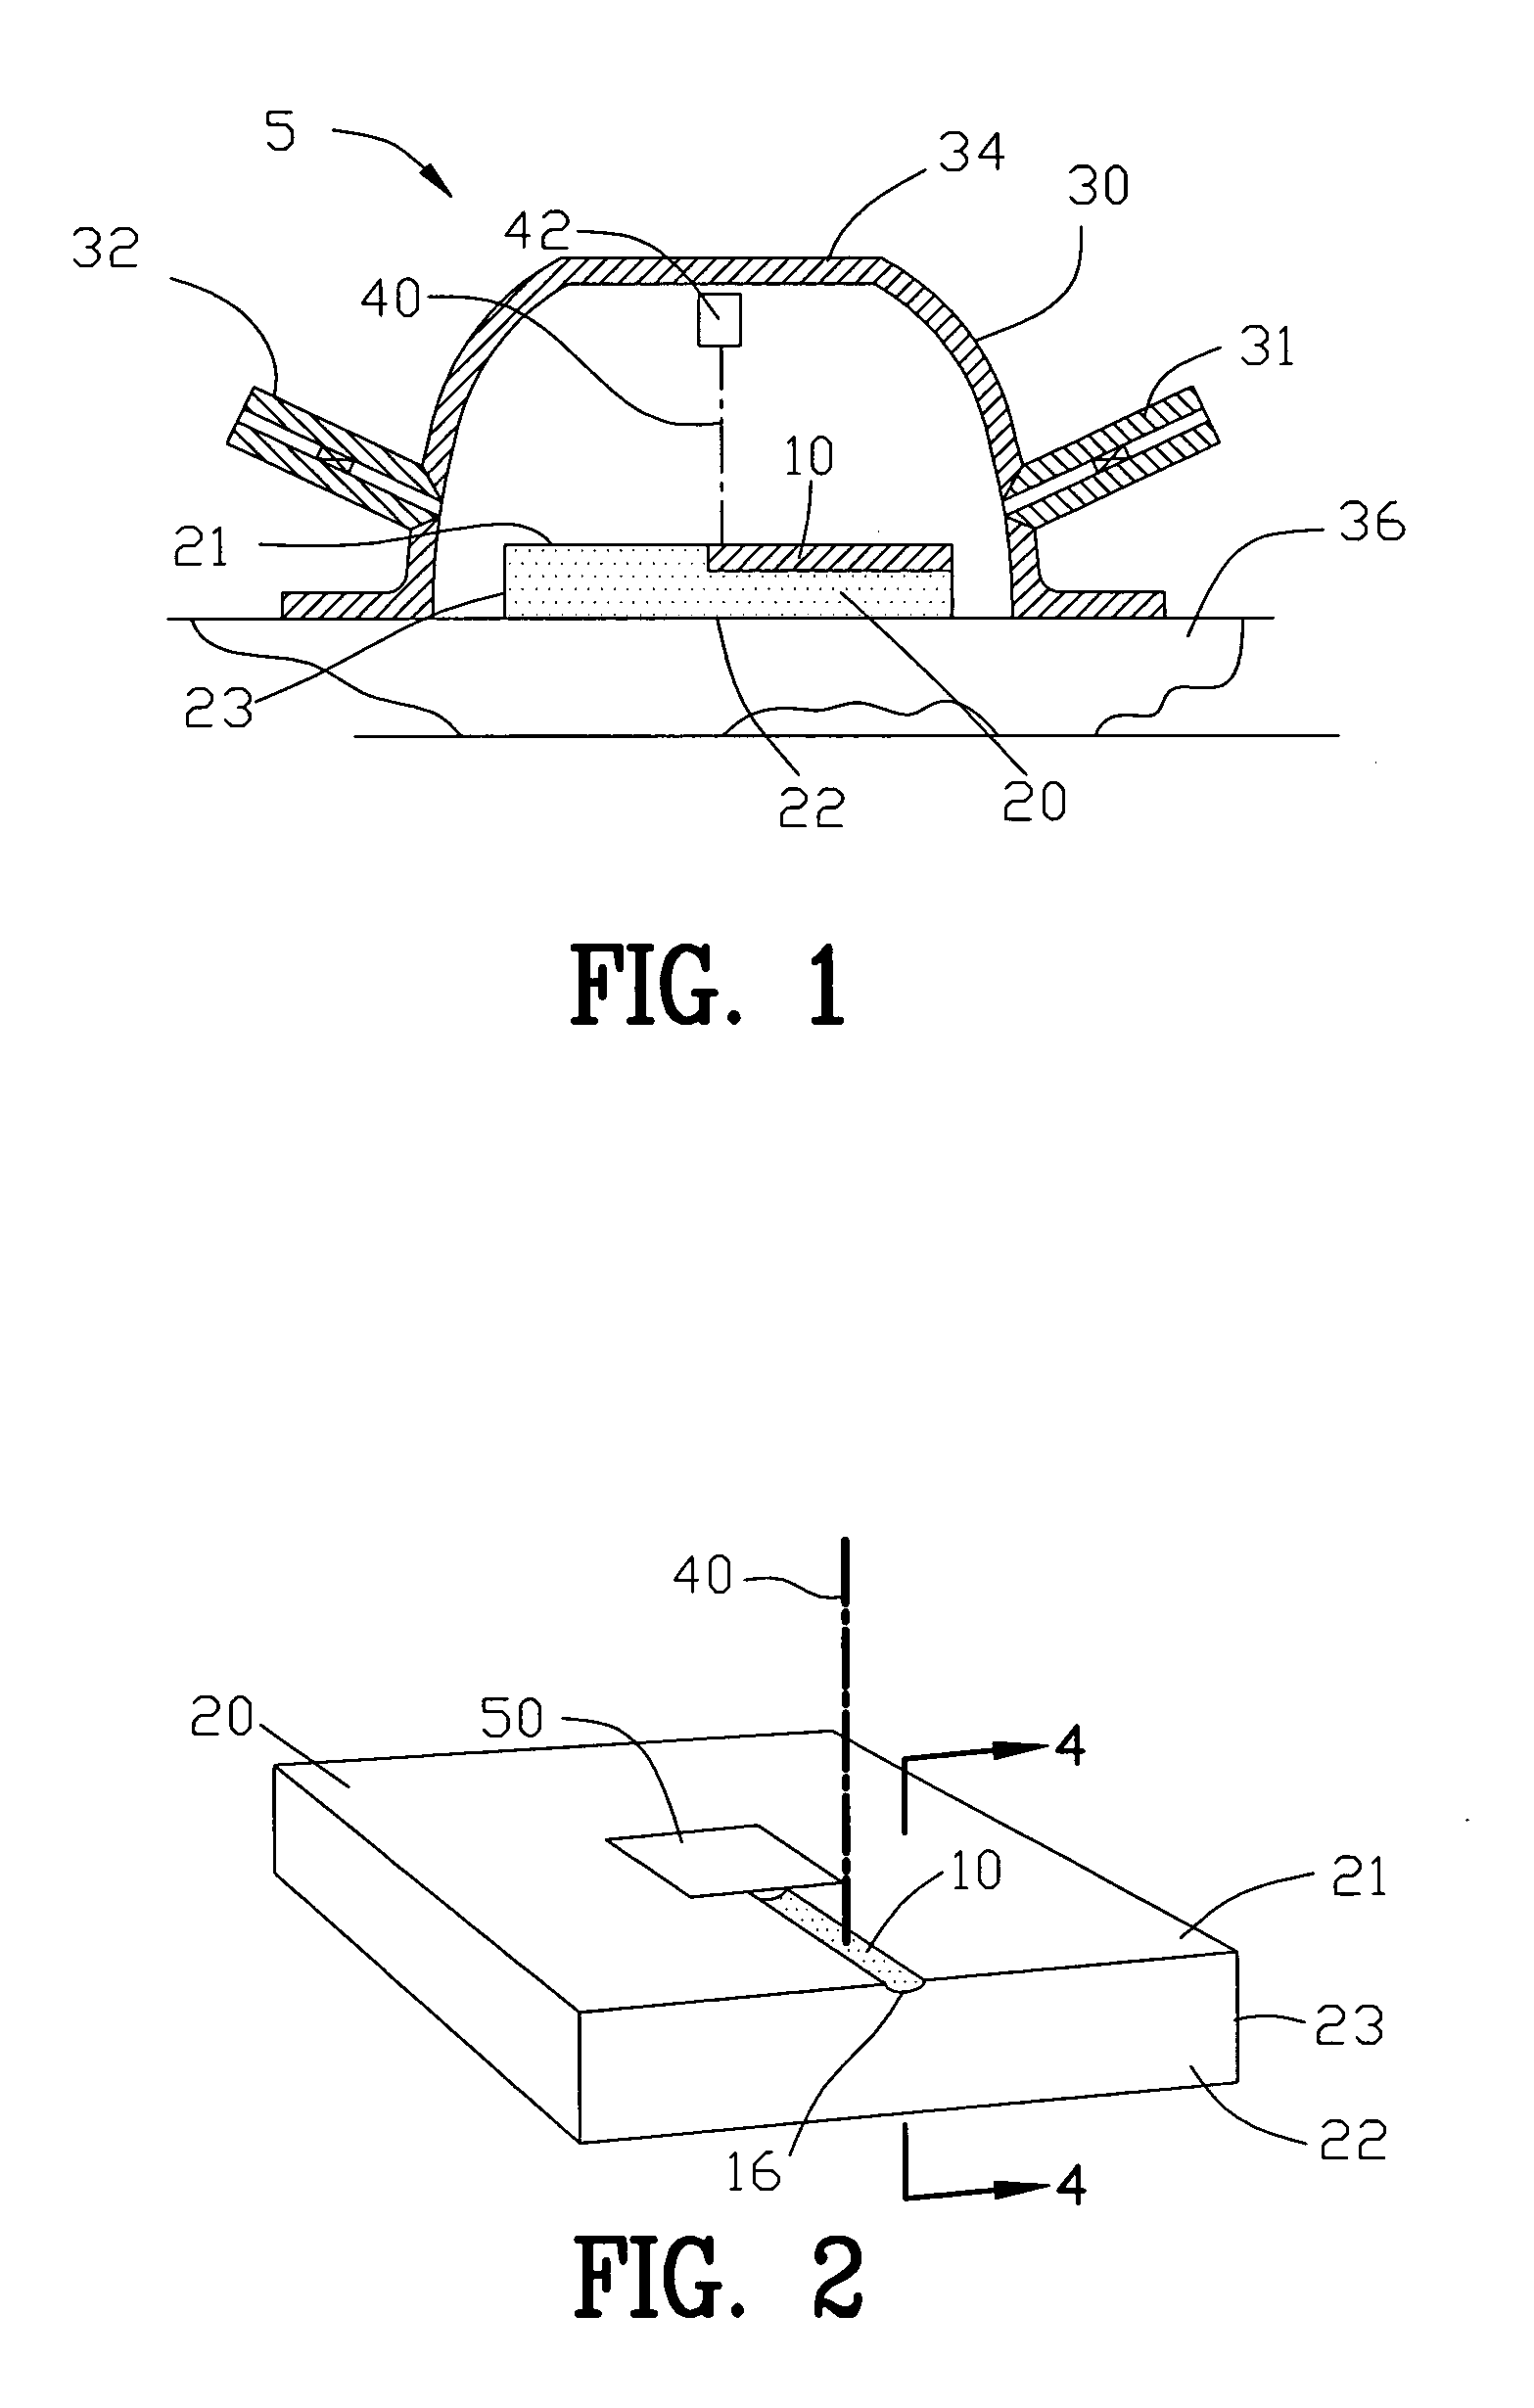 Nano-size semiconductor component and method of making